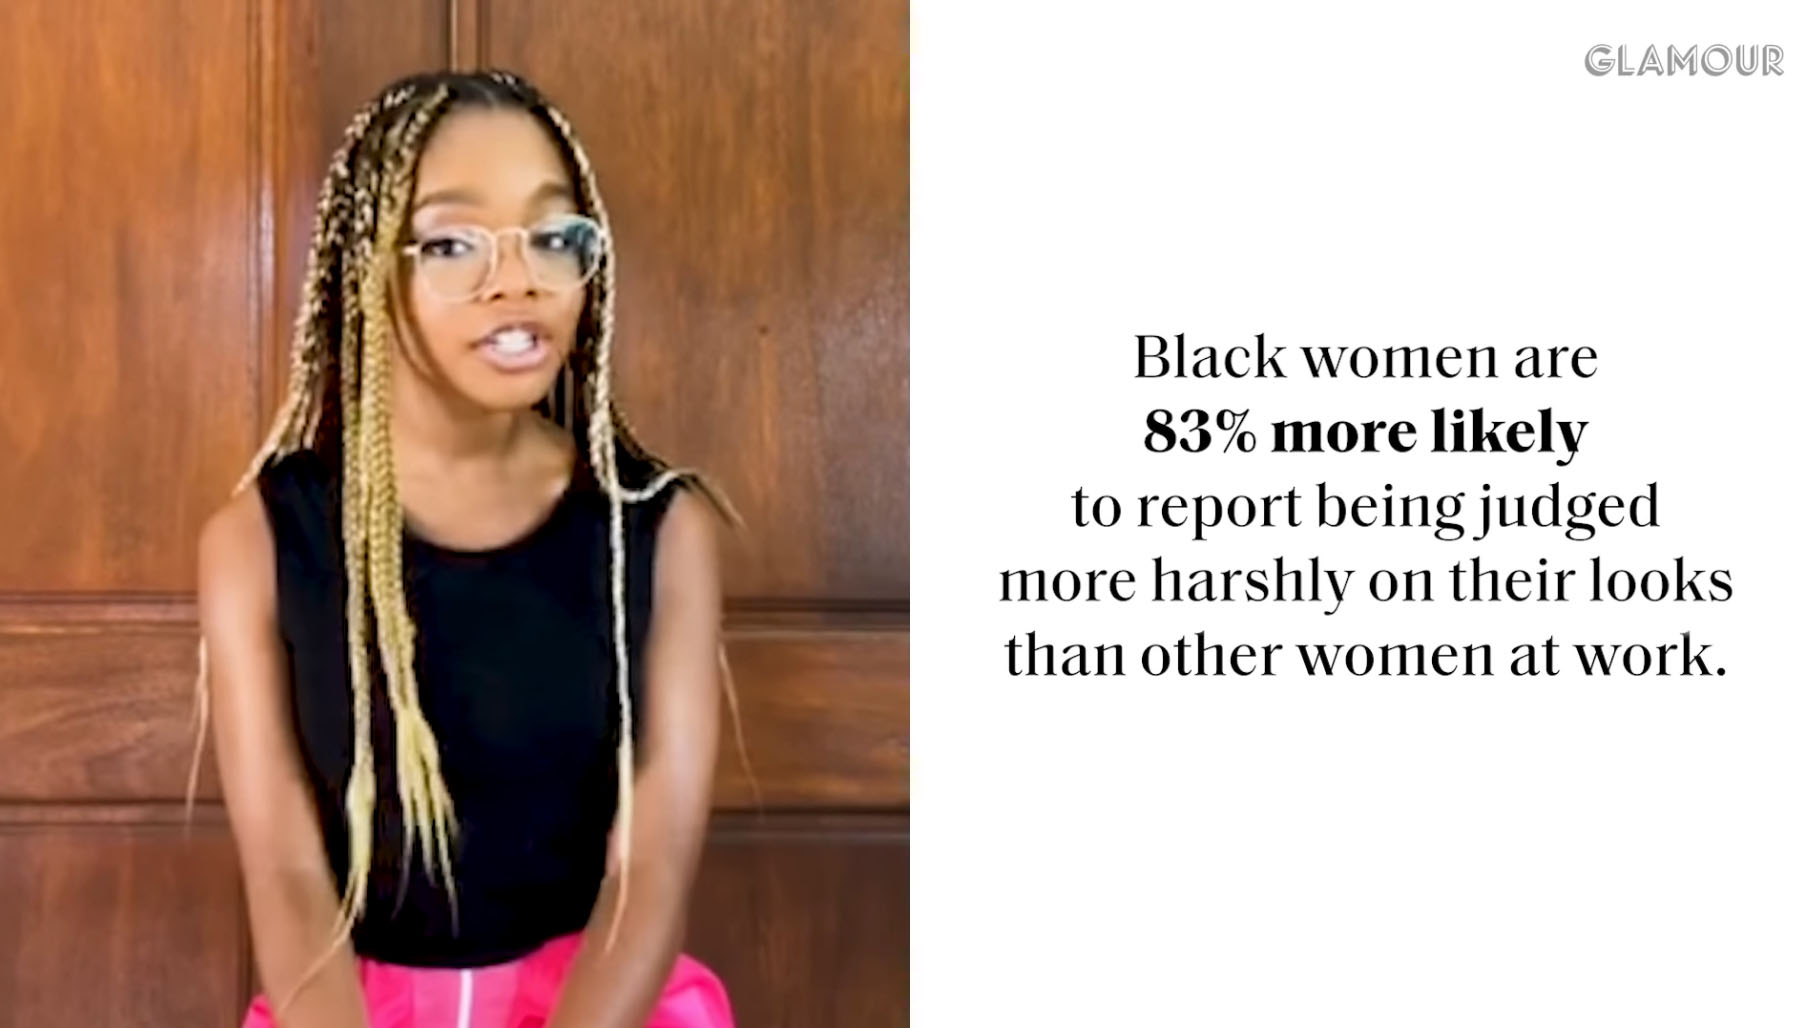 Marsai Martin with the caption 'Black women are 83% more likely to report being judged more harshly on their looks than other women at work.'